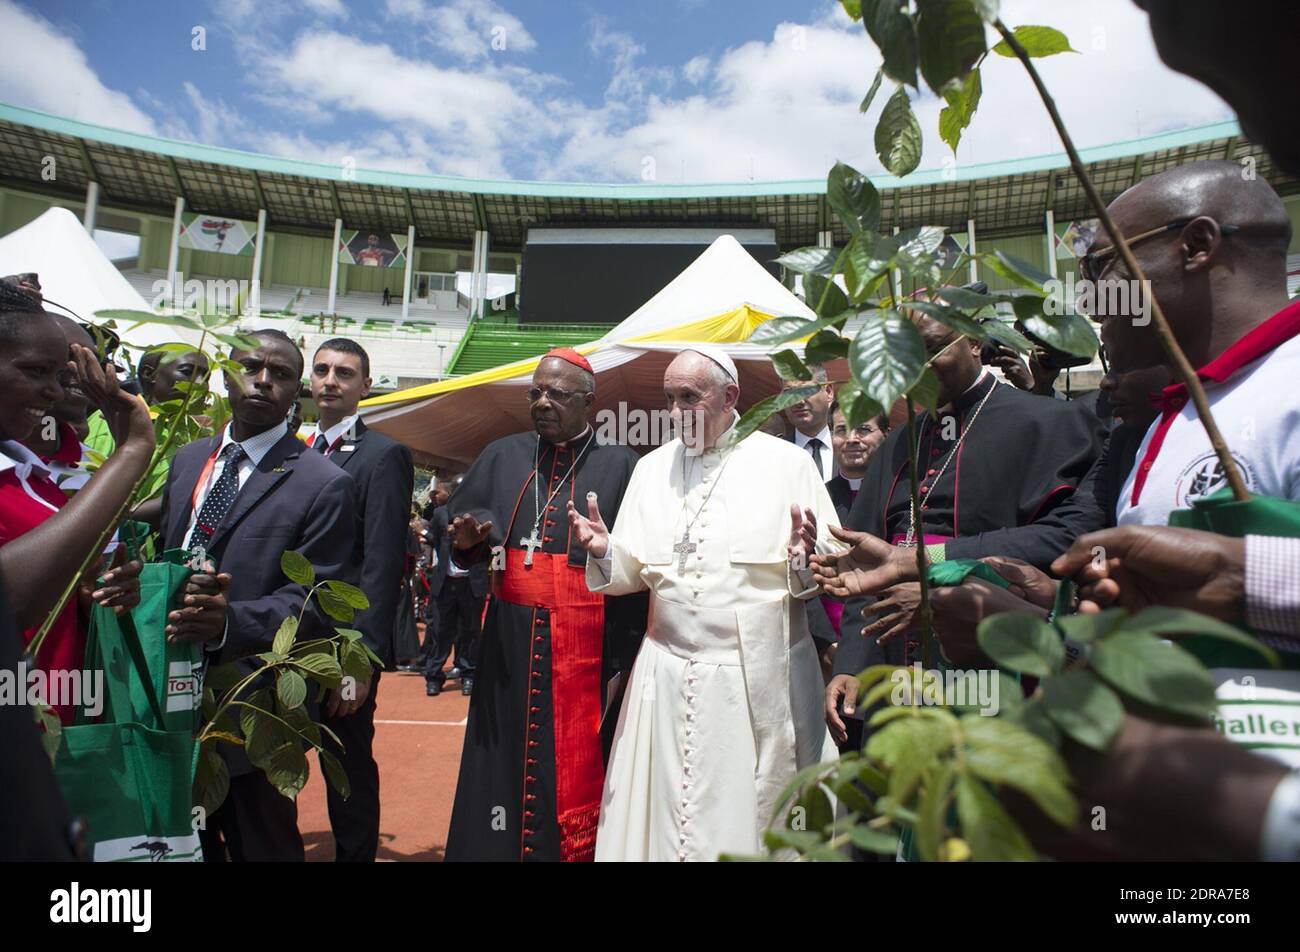 Pope Francis met with young people at the Kasarani Stadium in Nairobi , Kenya on November 27, 2015 where he addressed issues including corruption and tribalism. Photo by ABACAPRESS.COM Stock Photo